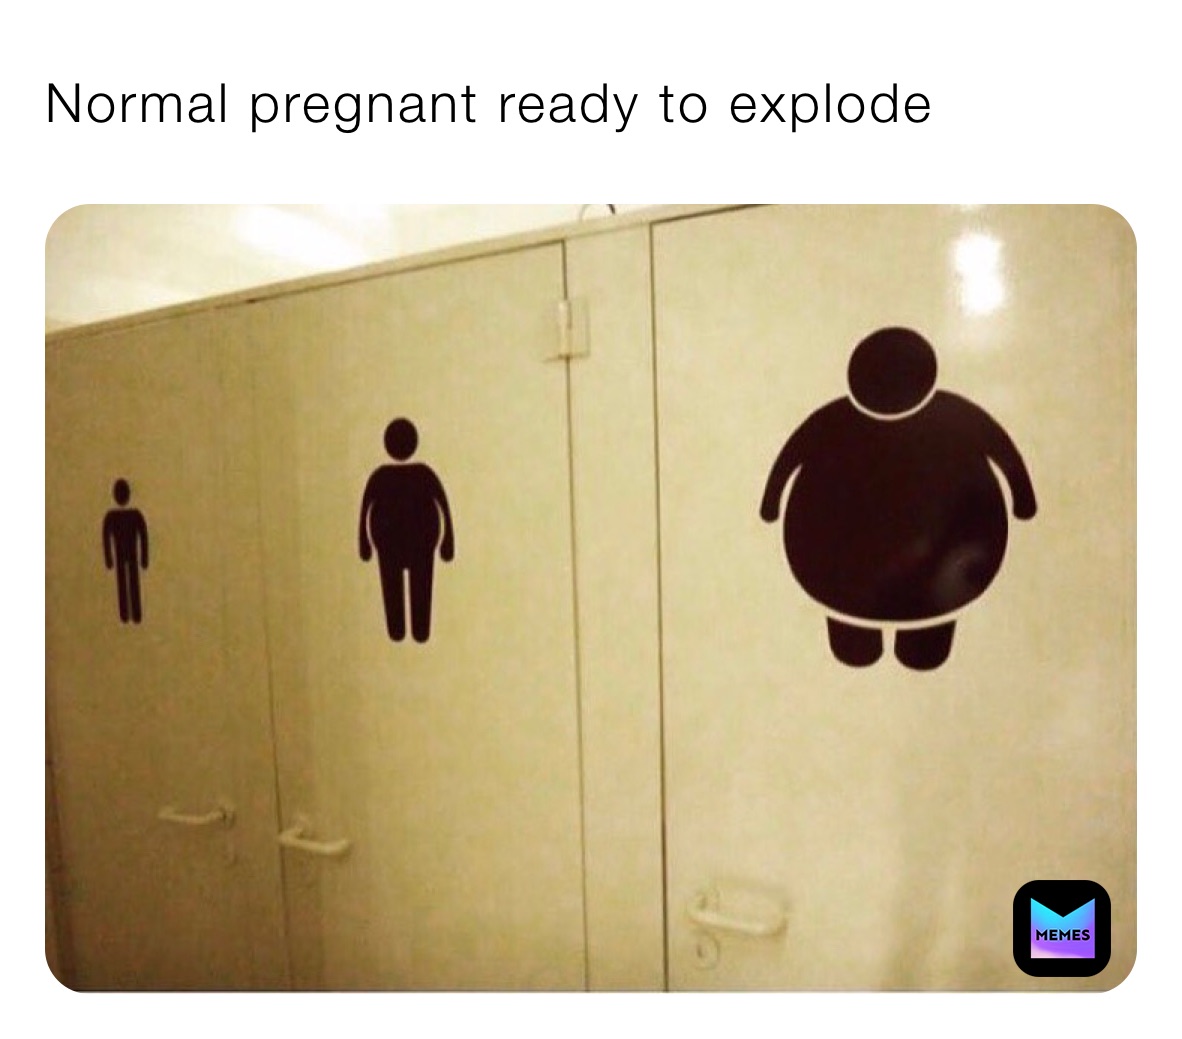 Normal pregnant ready to explode￼